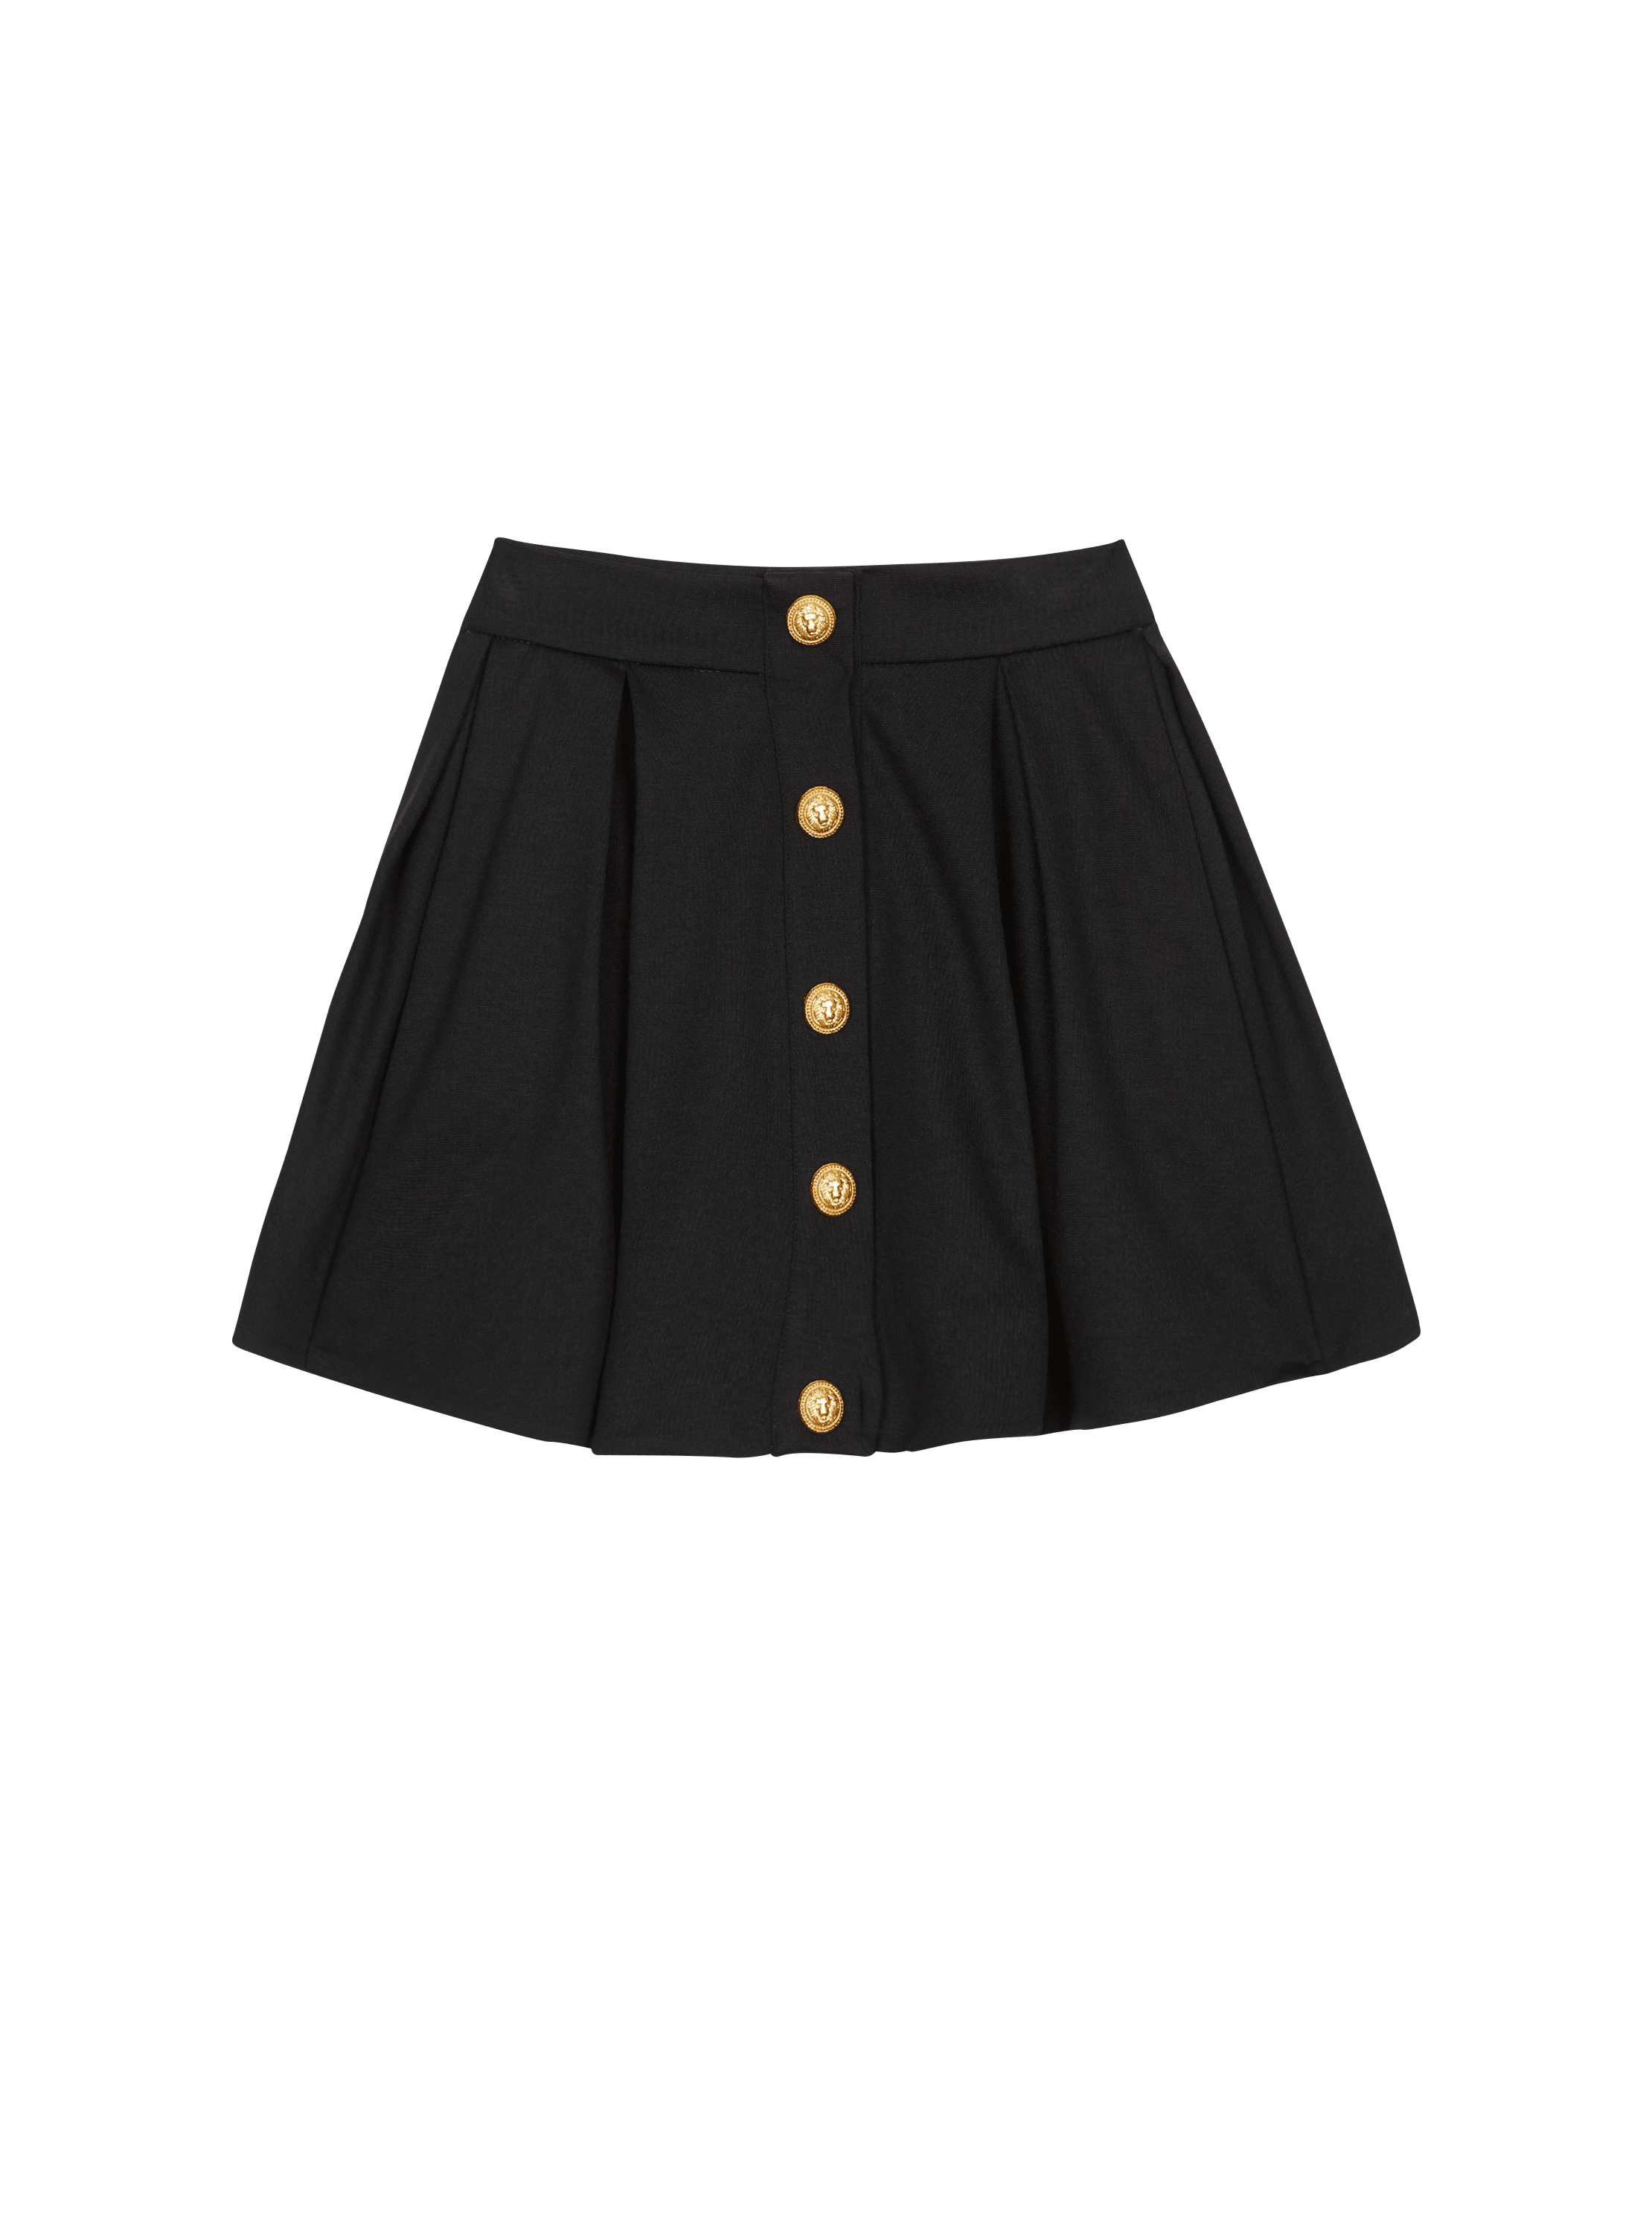 Black Pleated Skirt with Chain-Belt Punk Rock Girl Cheerleading Belted Mini  Skirt Women Girl Outfit (Color : Black, Size : Small)